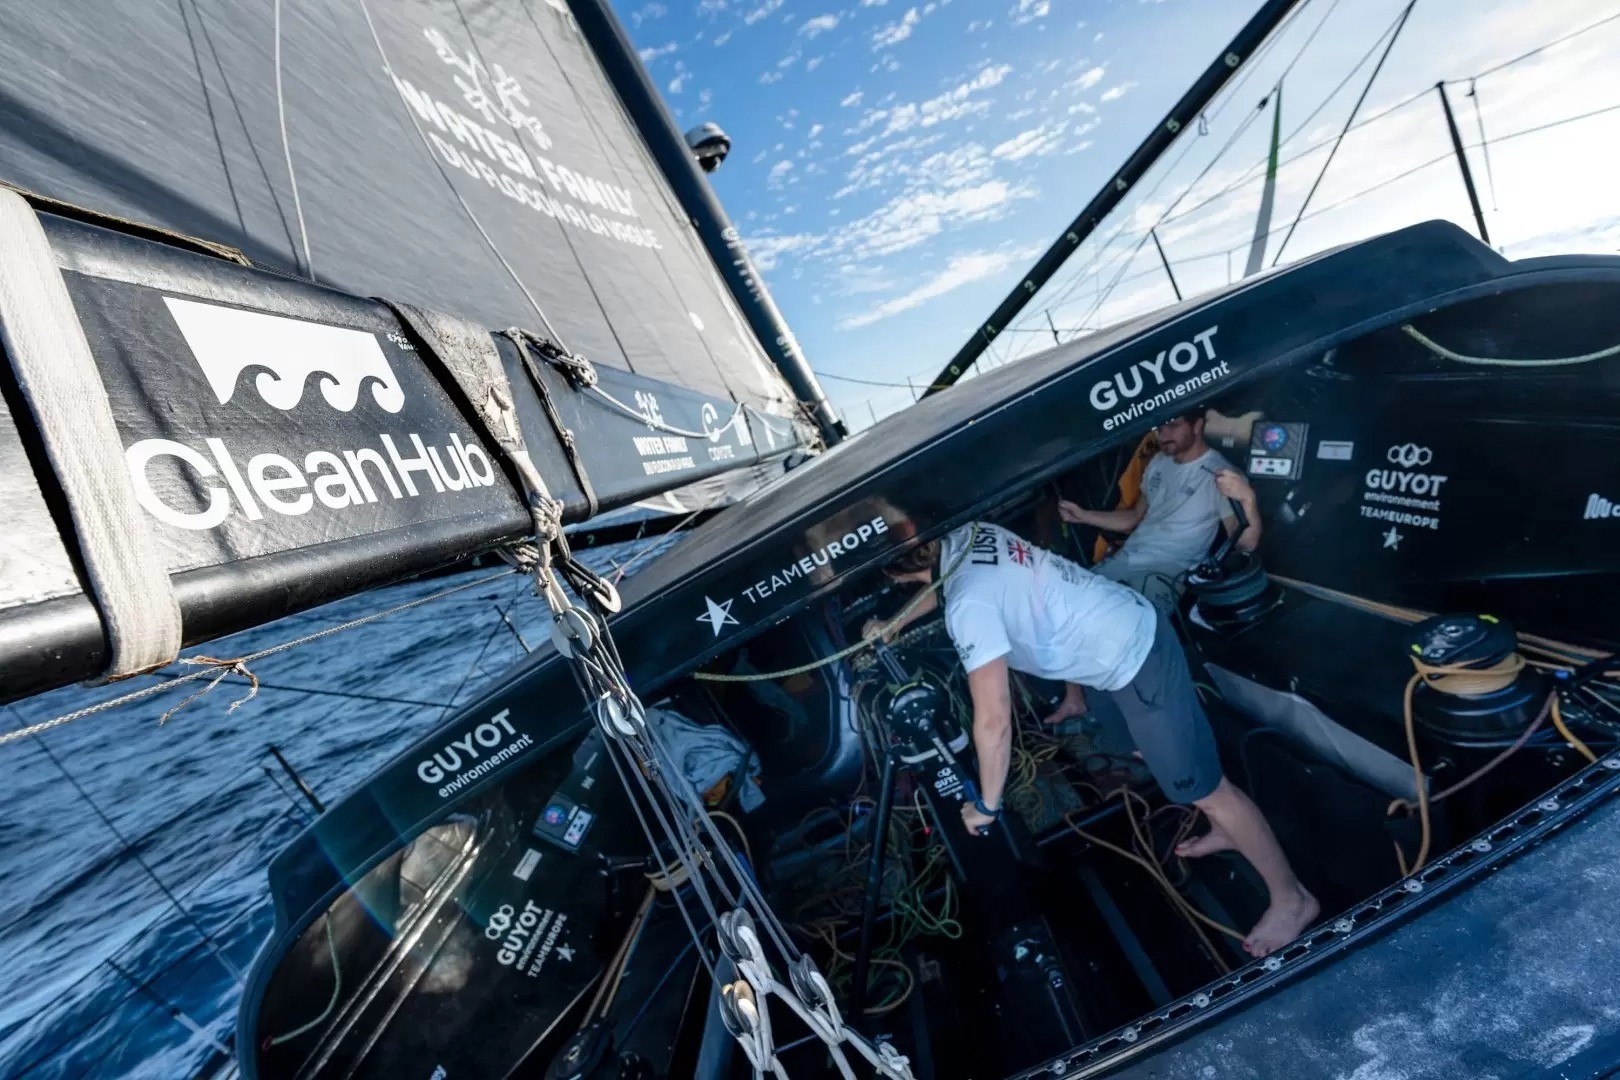 GUYOT environnement - Team Europe has dismasted, all onboard are safe